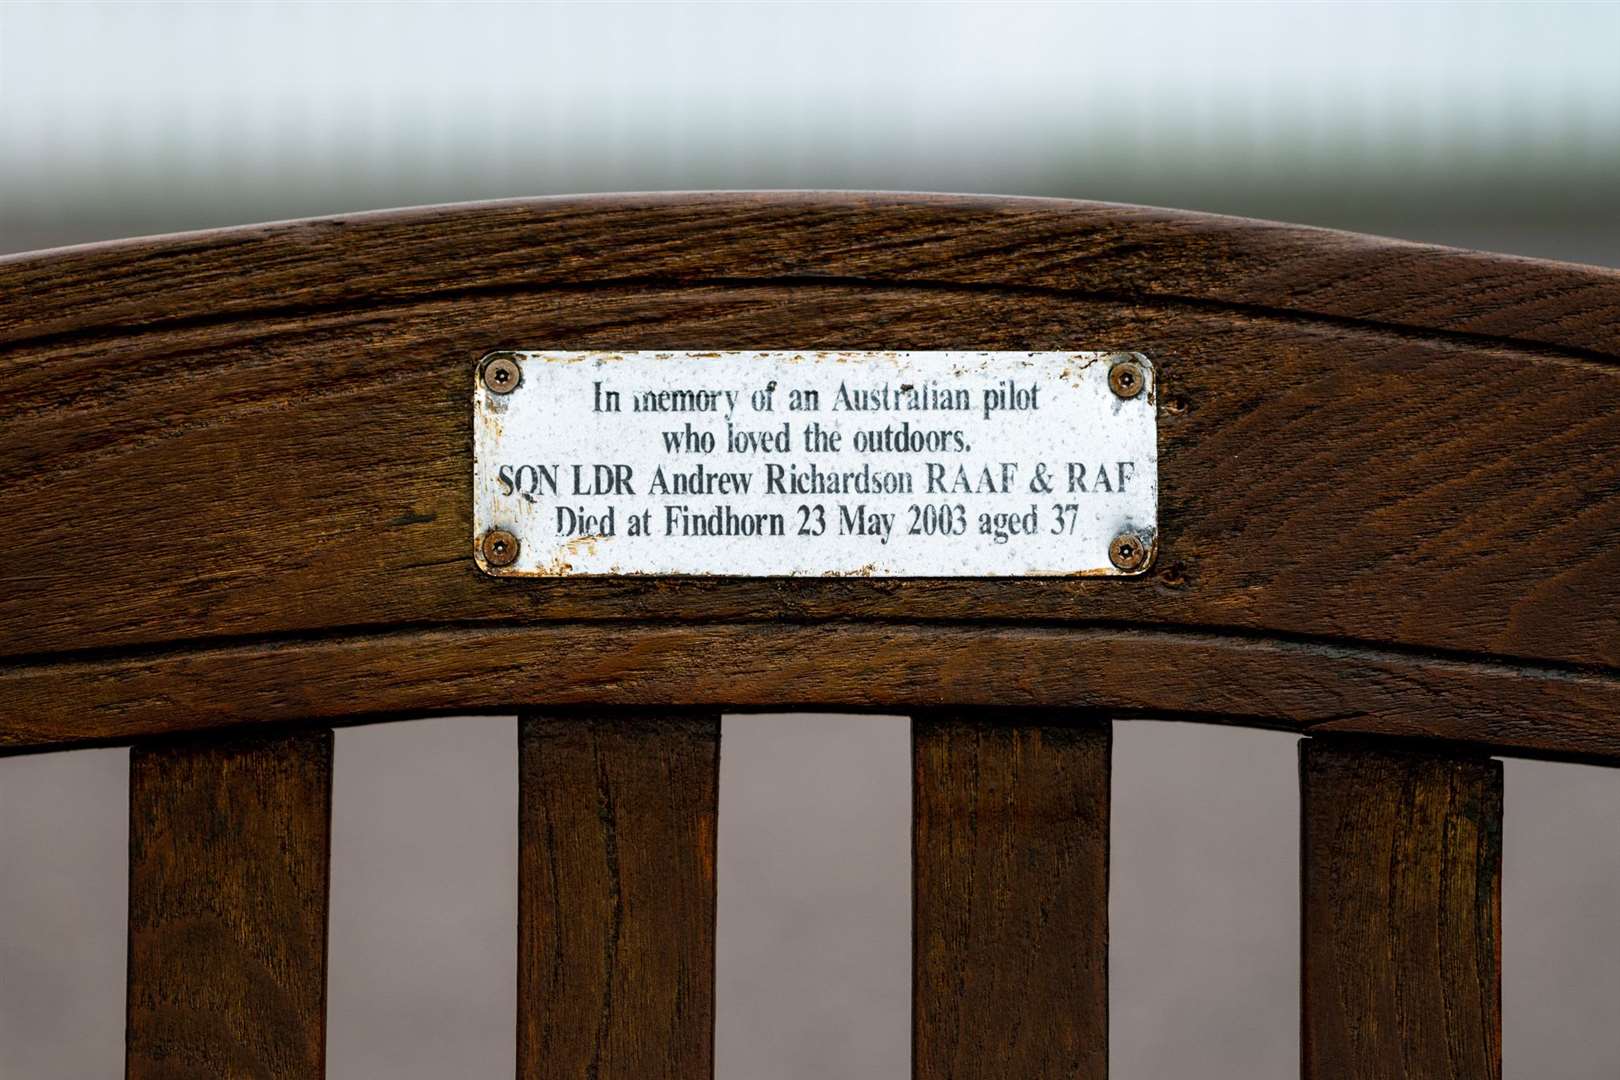 The inscription on the bench's plaque.